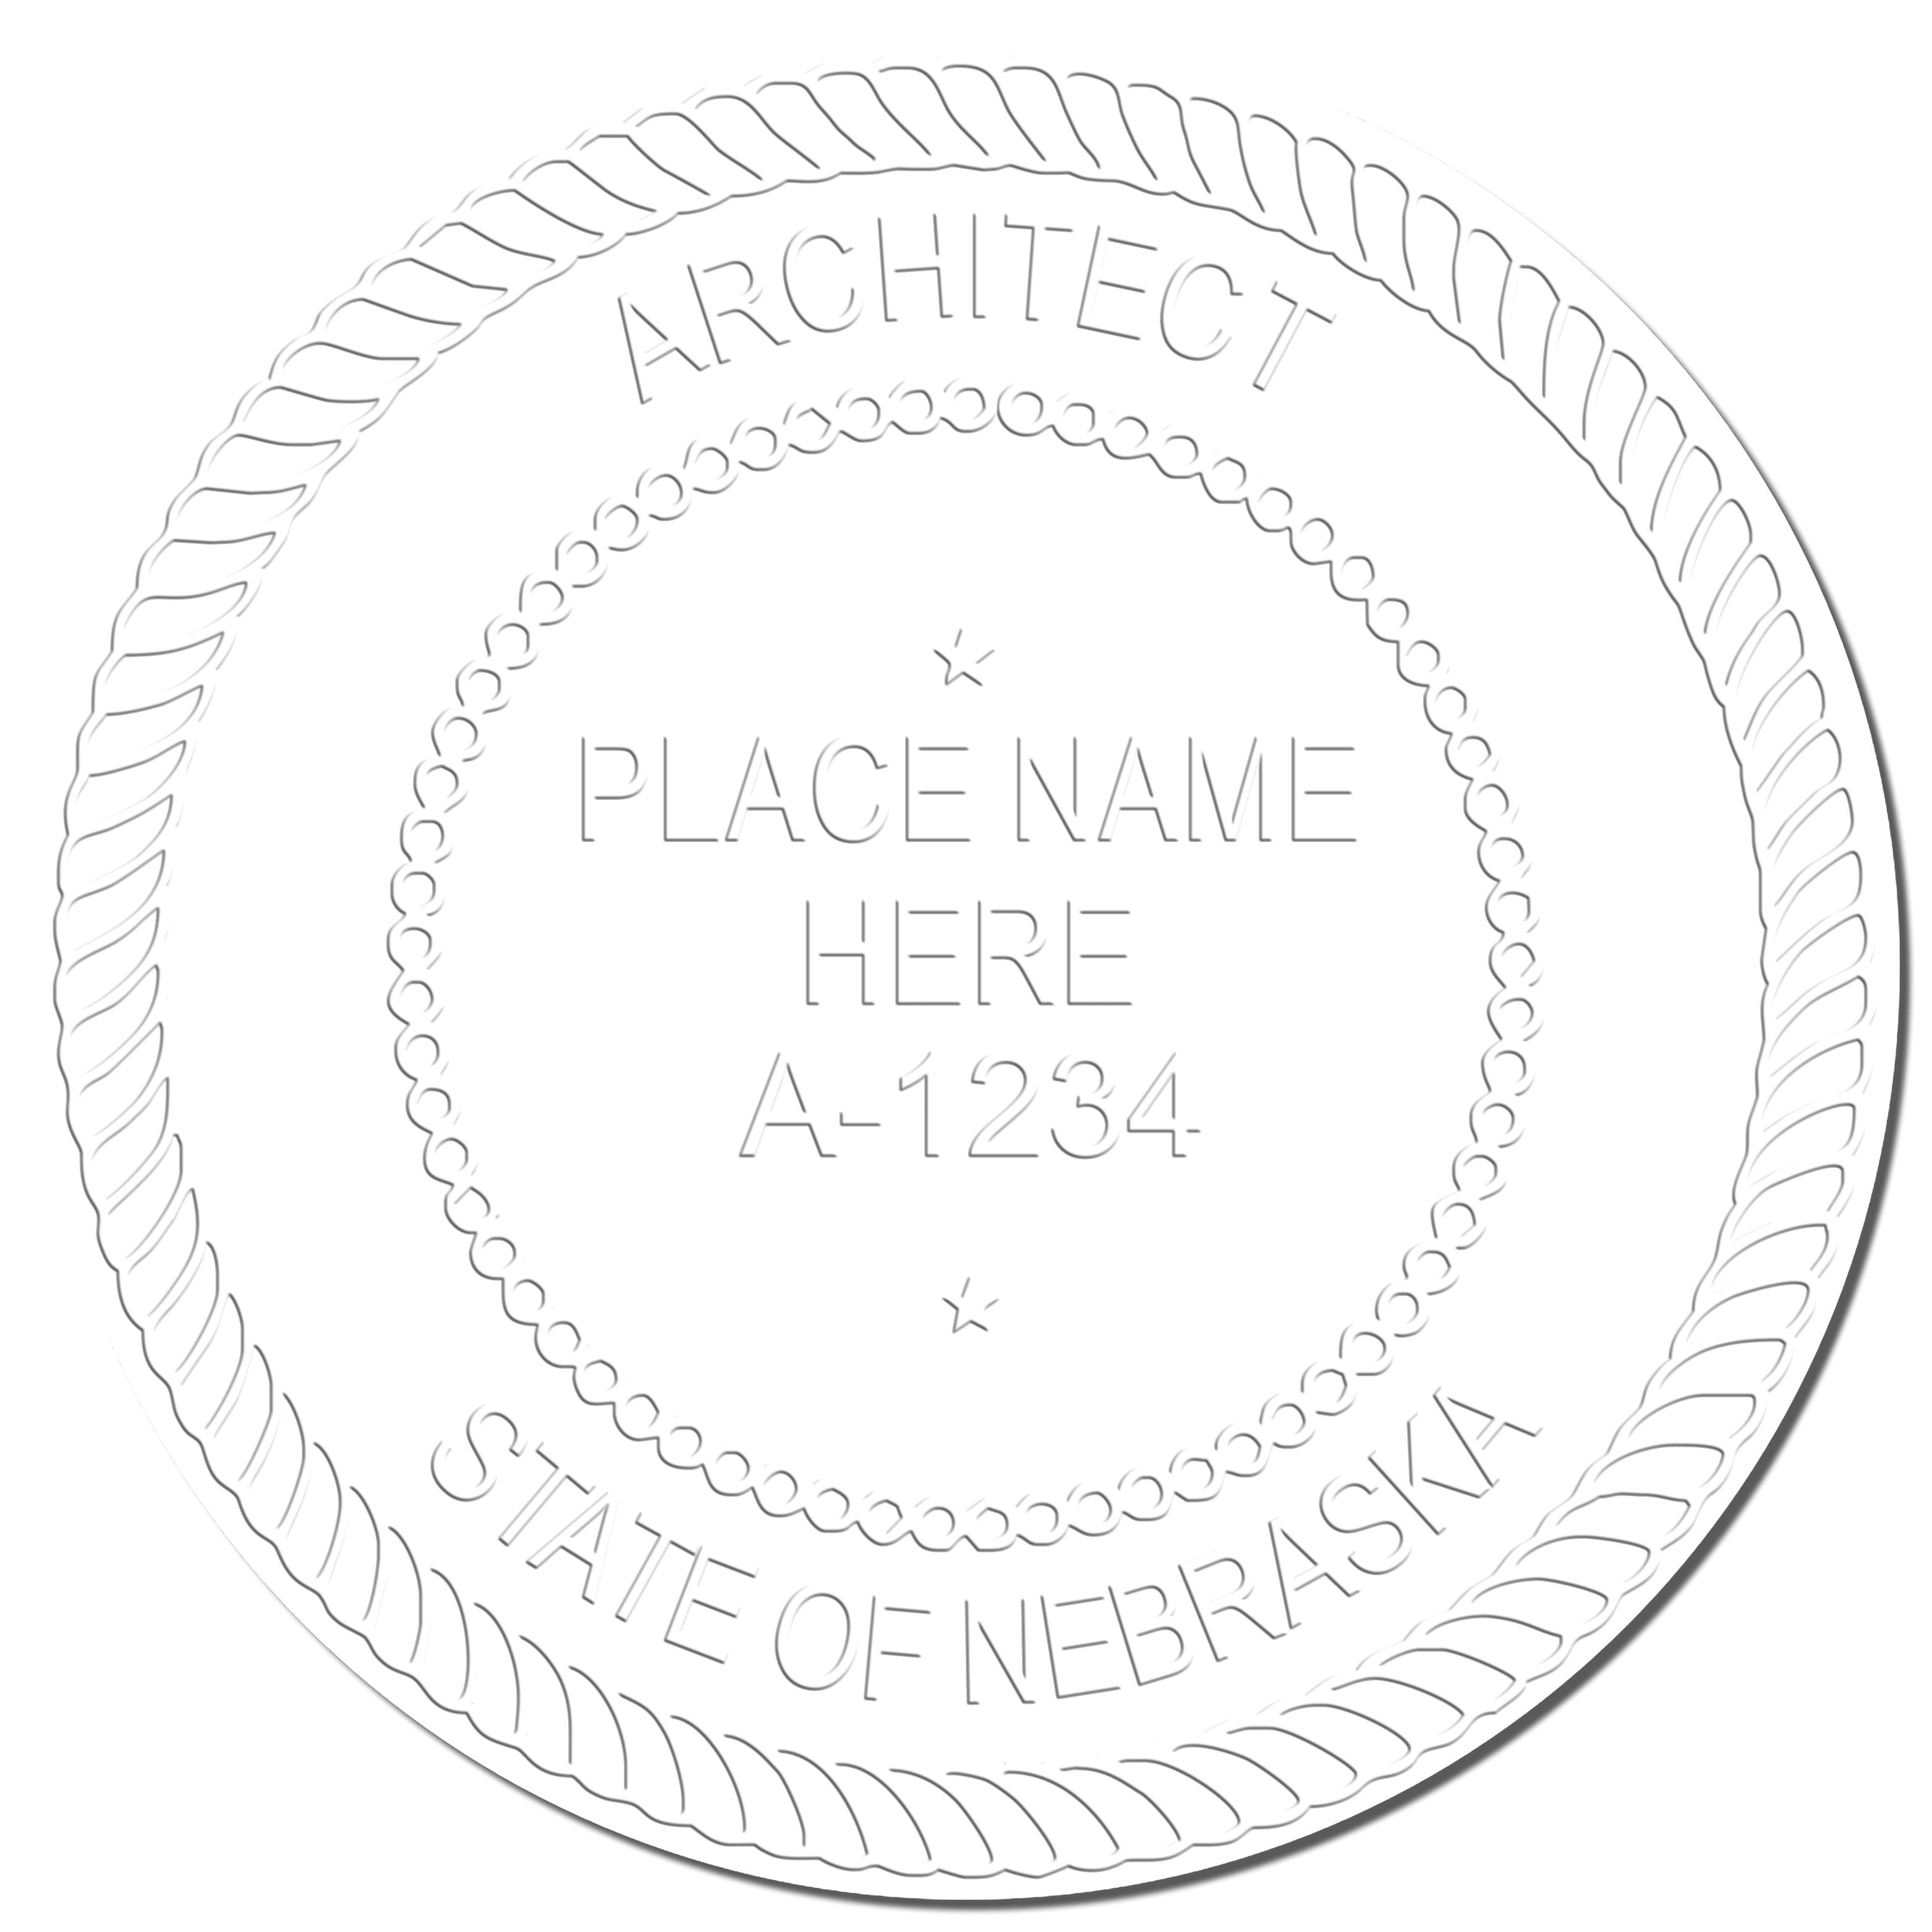 This paper is stamped with a sample imprint of the Gift Nebraska Architect Seal, signifying its quality and reliability.